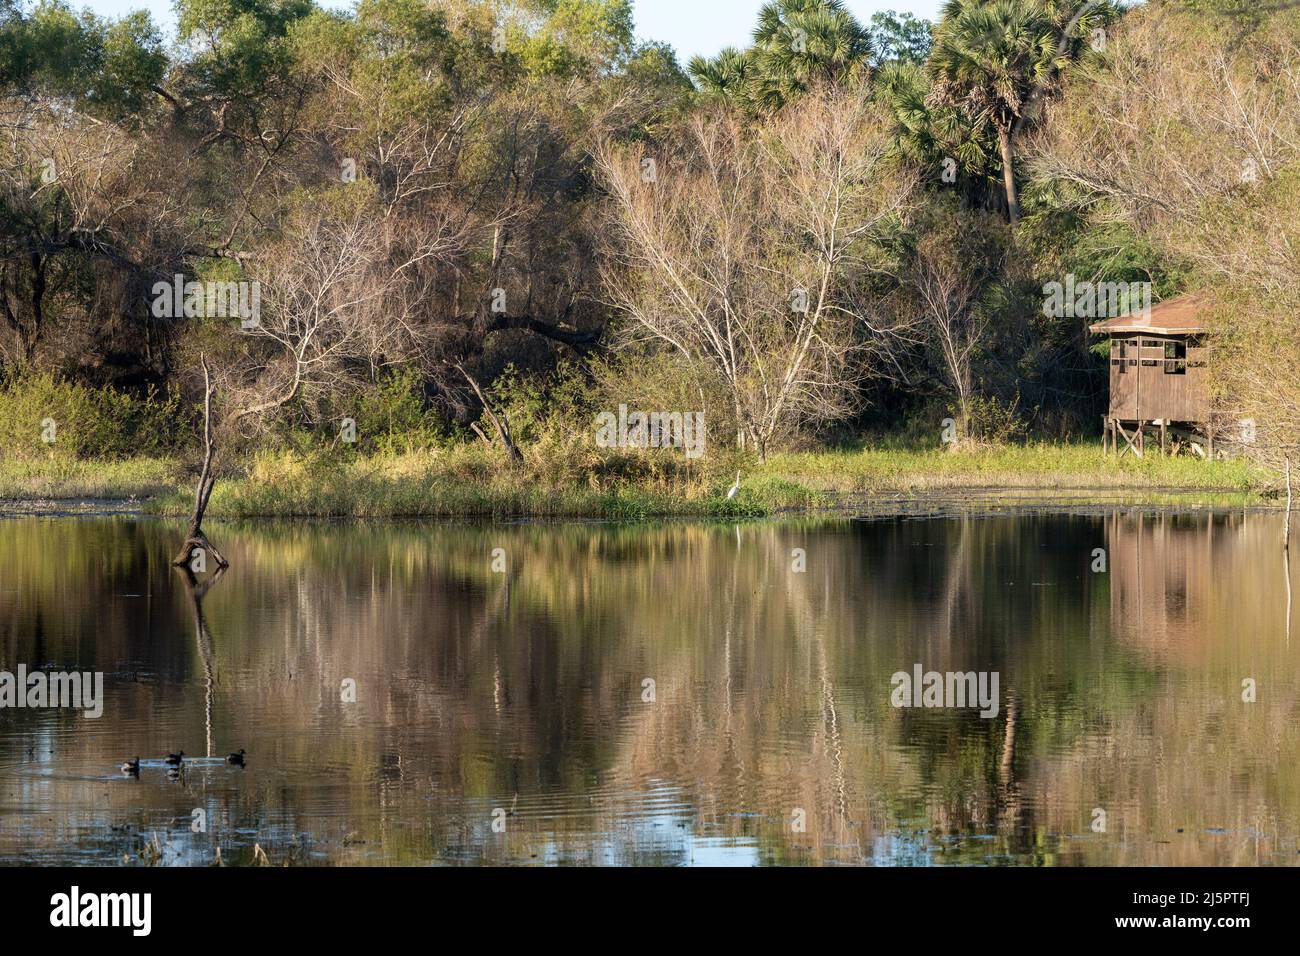 A Great Egret hunts along the shore of a resaca or oxbow lake in the Sabal Palm Sanctuary, Brownsville, Texas.  At right is a bird observation blind. Stock Photo